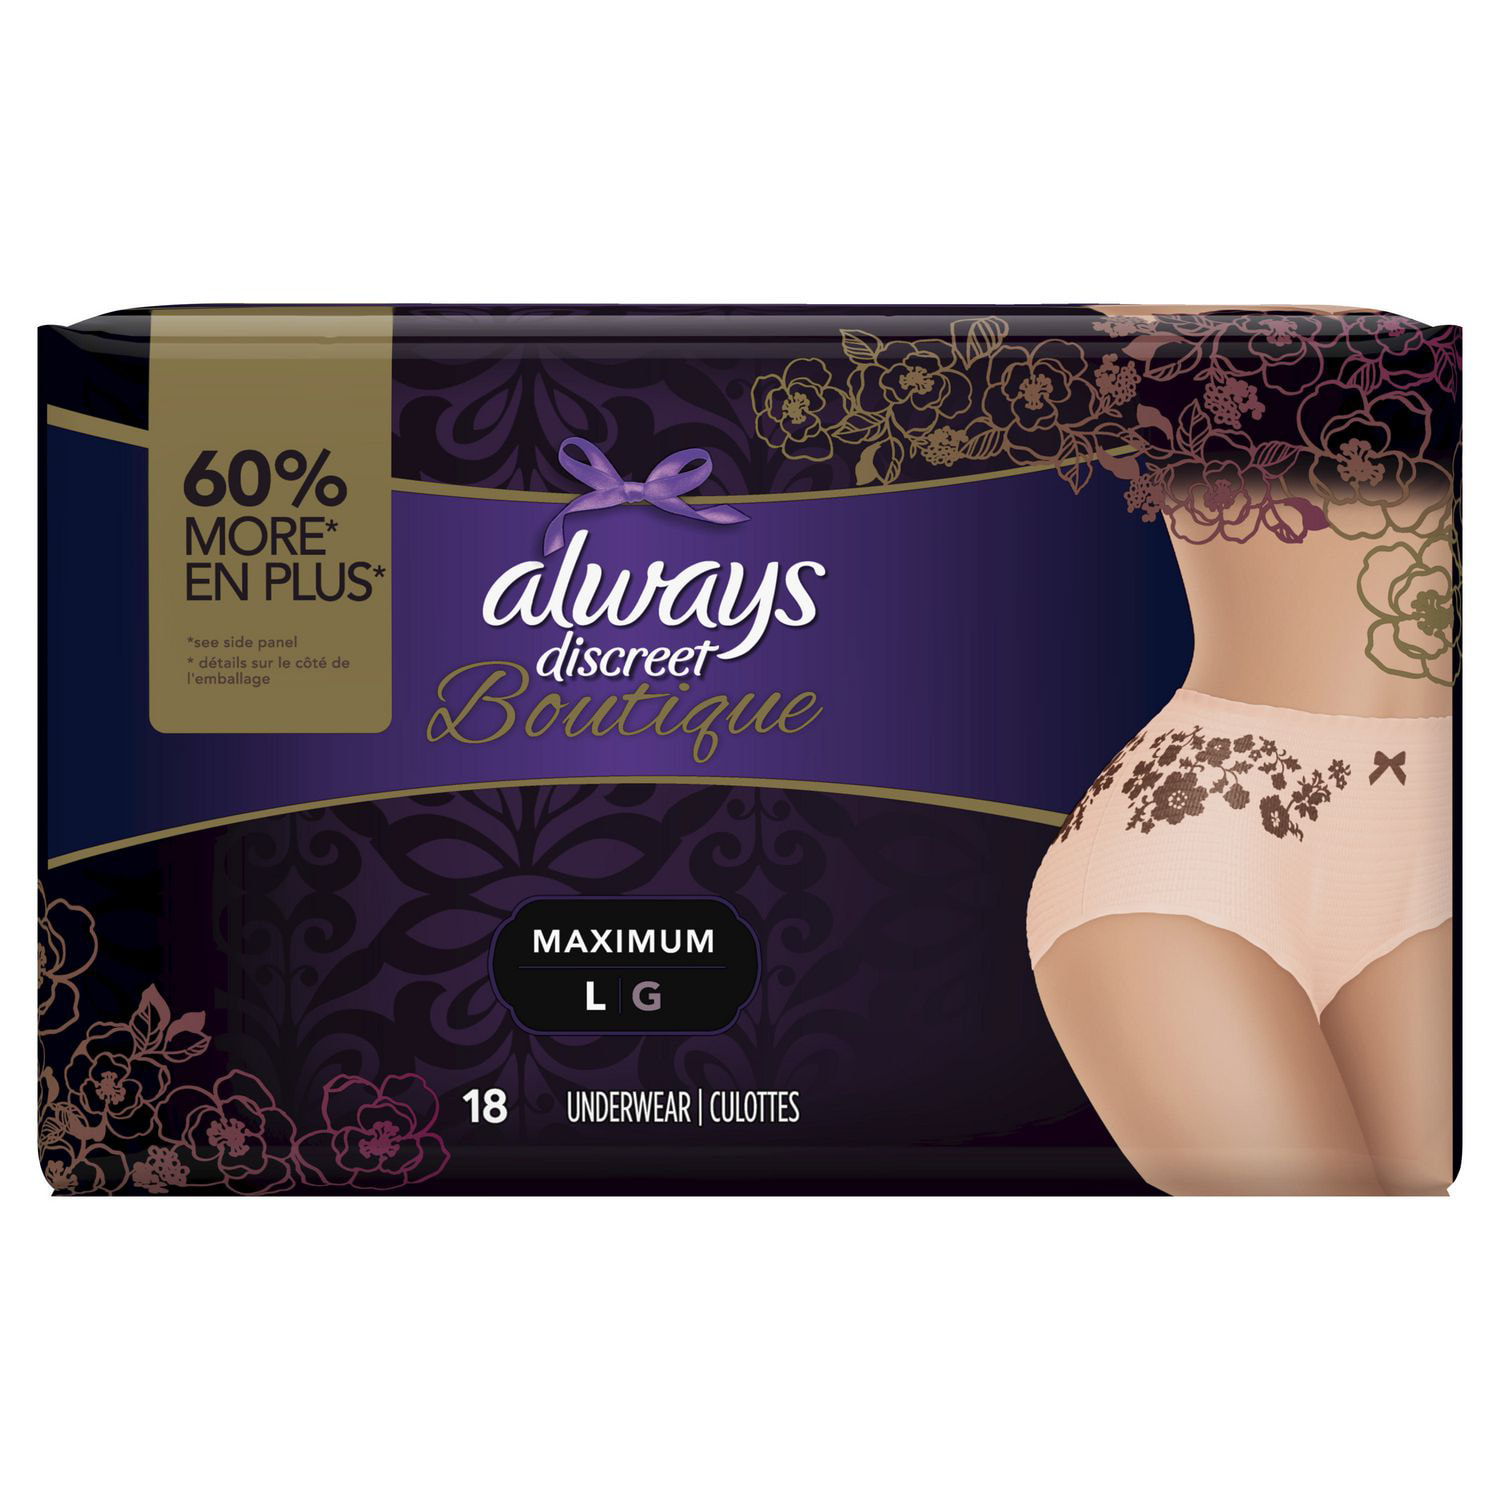 Safe & Dry Stylish Lace Front Incontinence Brief With Absorbent Multi